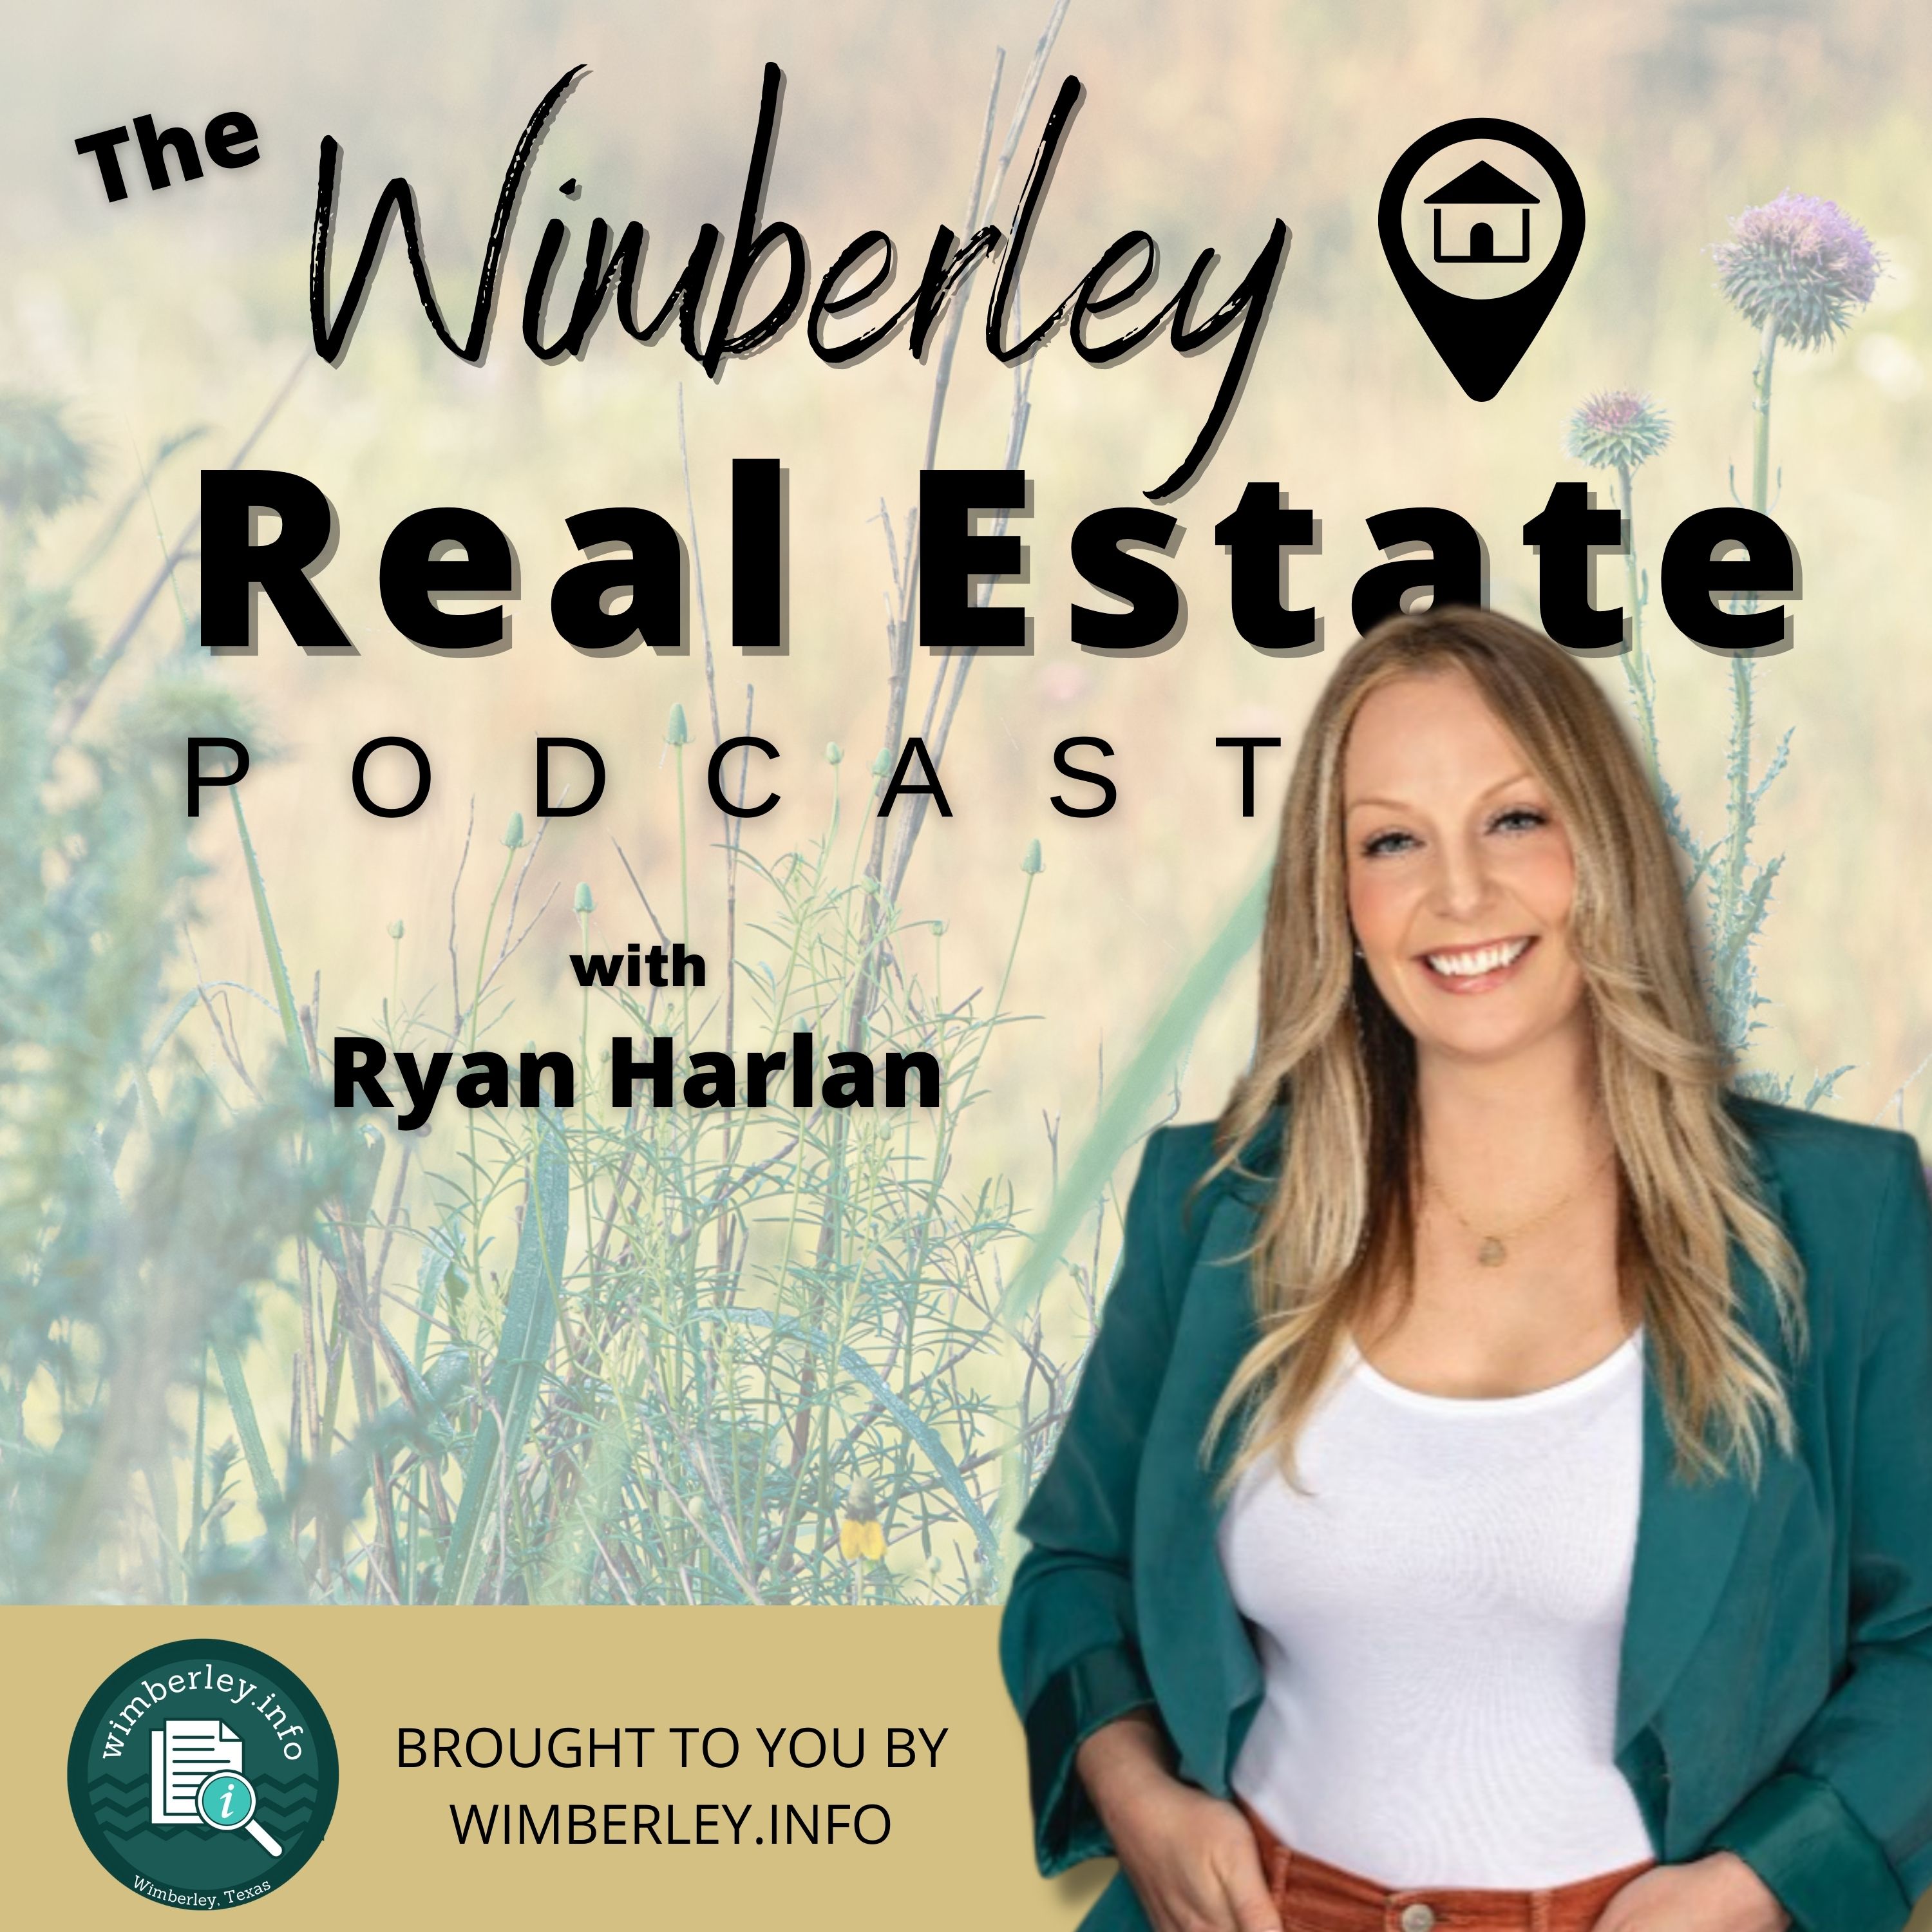 Ryan Harlan Set To Challenge The Status Quo In The Wimberley Real Estate Market